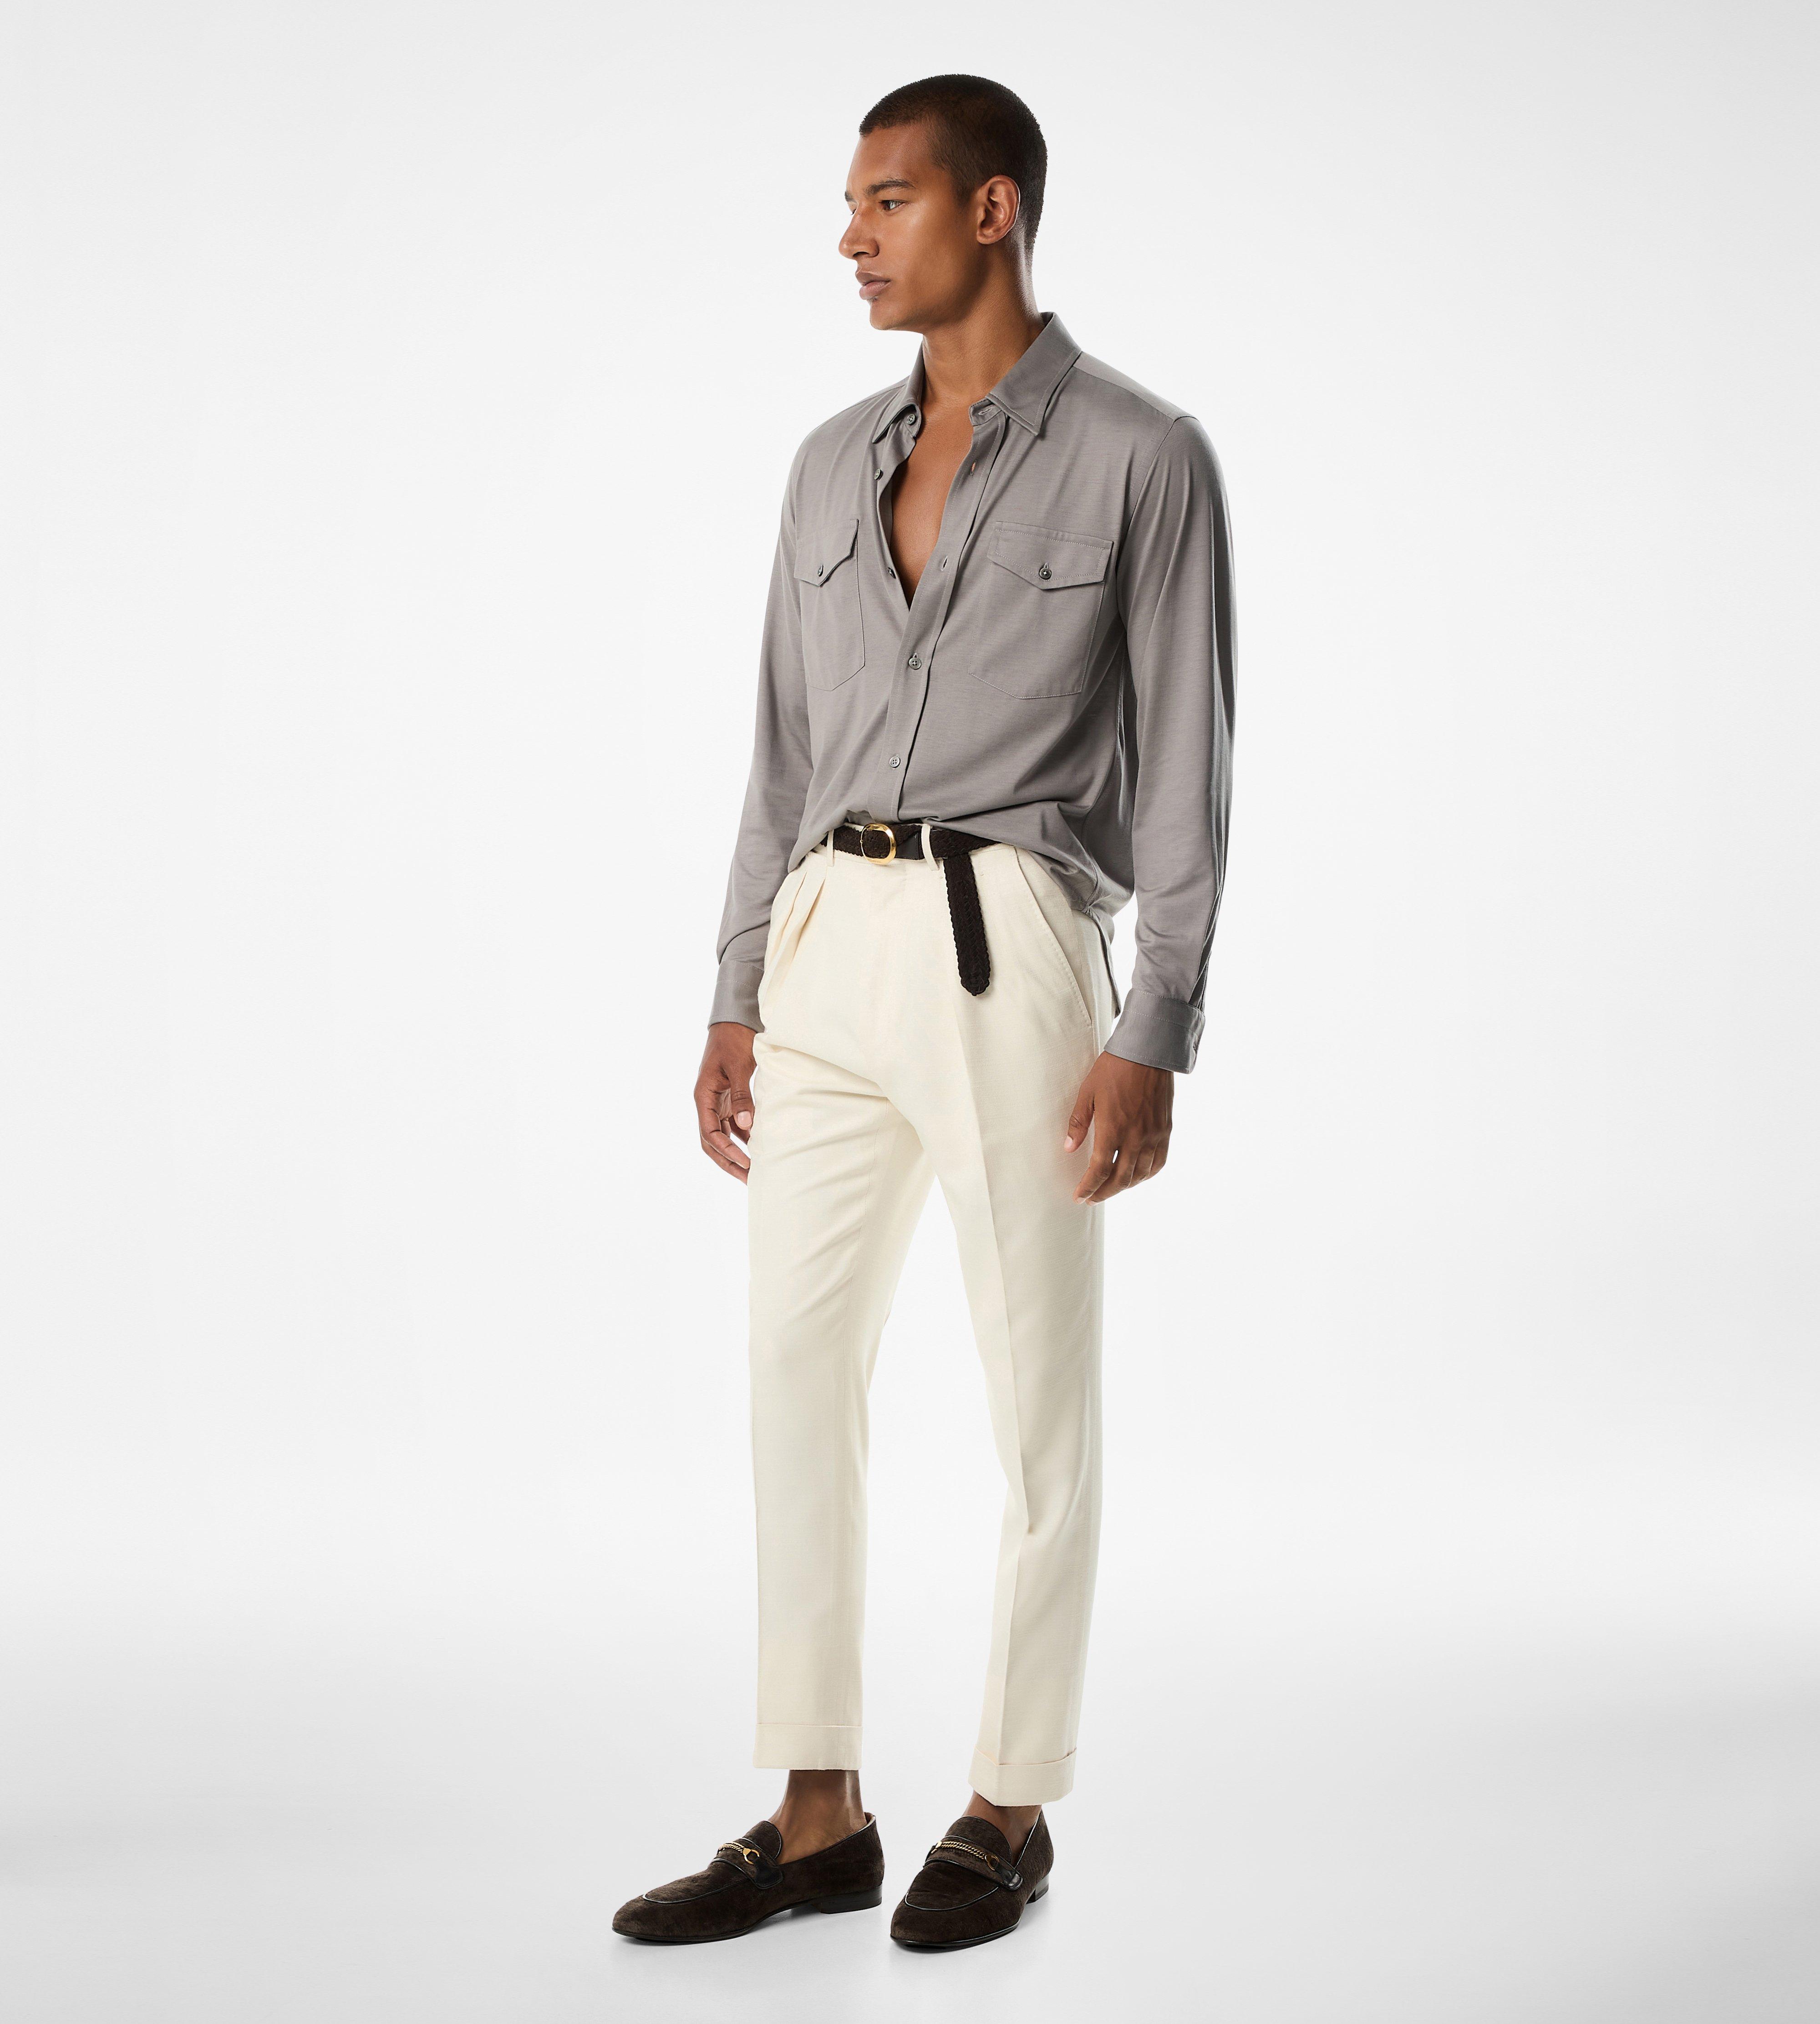 TOM FORD Slim-Fit Mohair And Viscose Dress Pants, Dress Pants